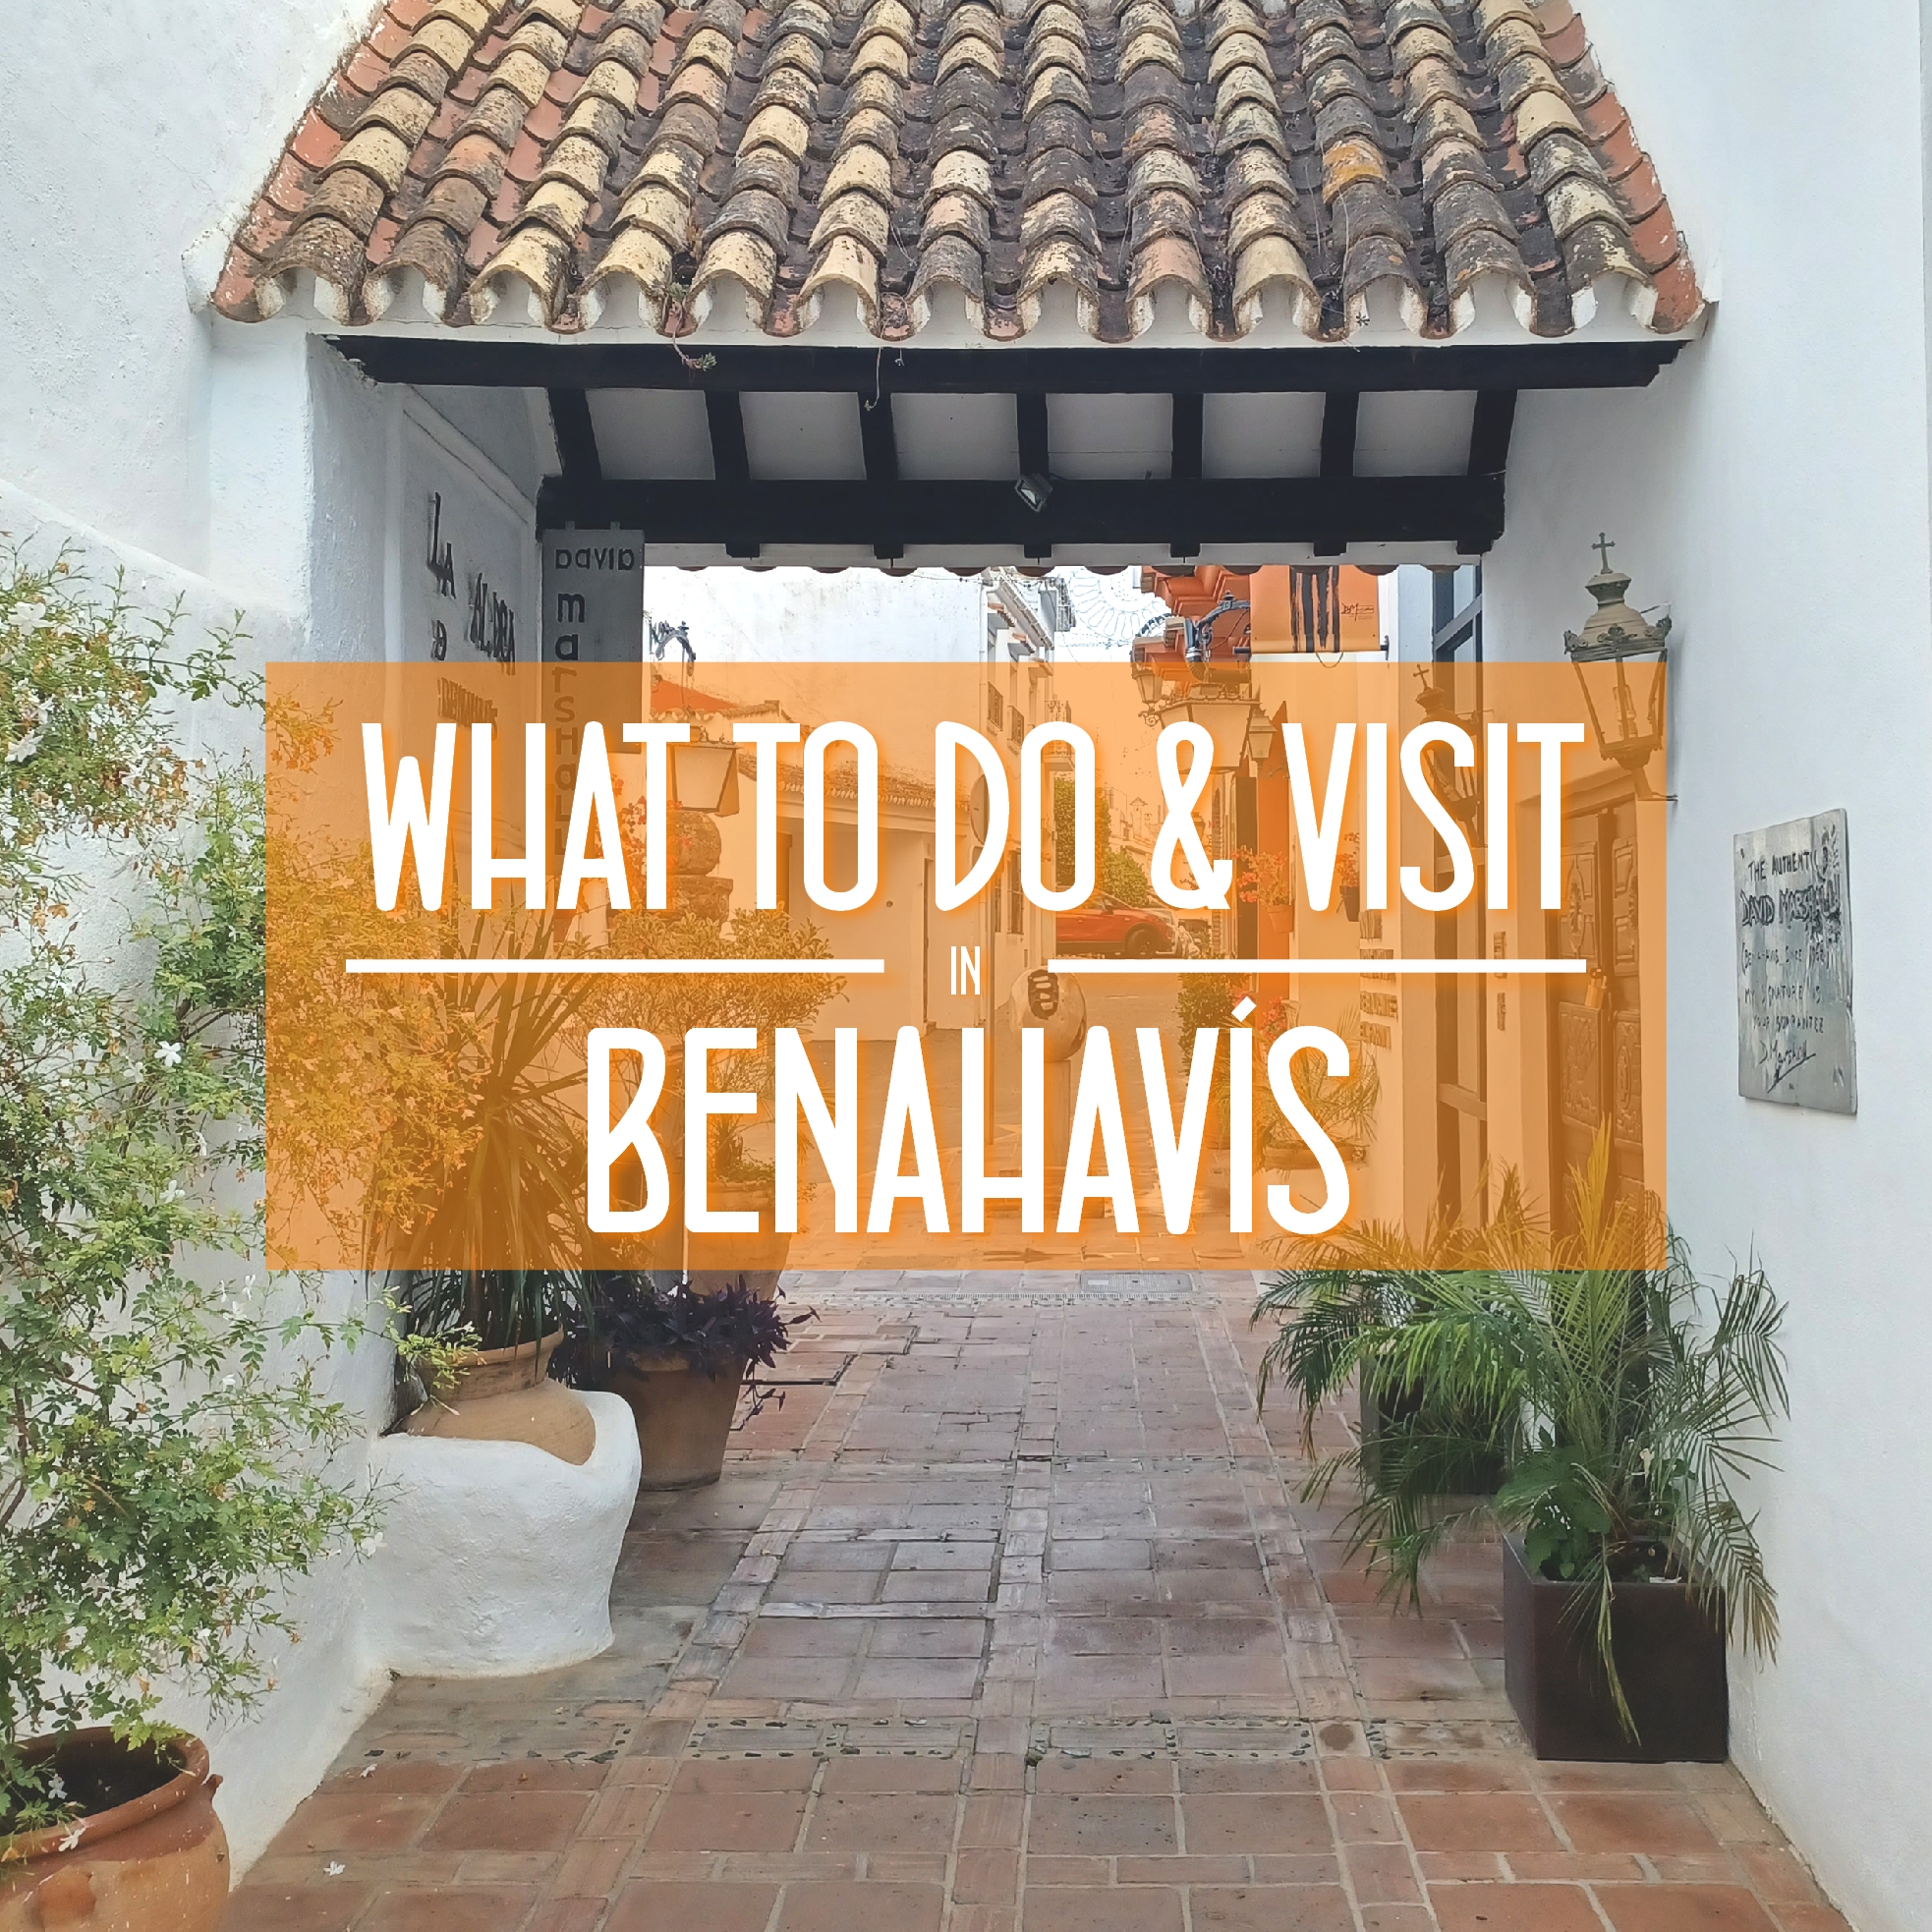 What to do and visit in Benahavis Malaga